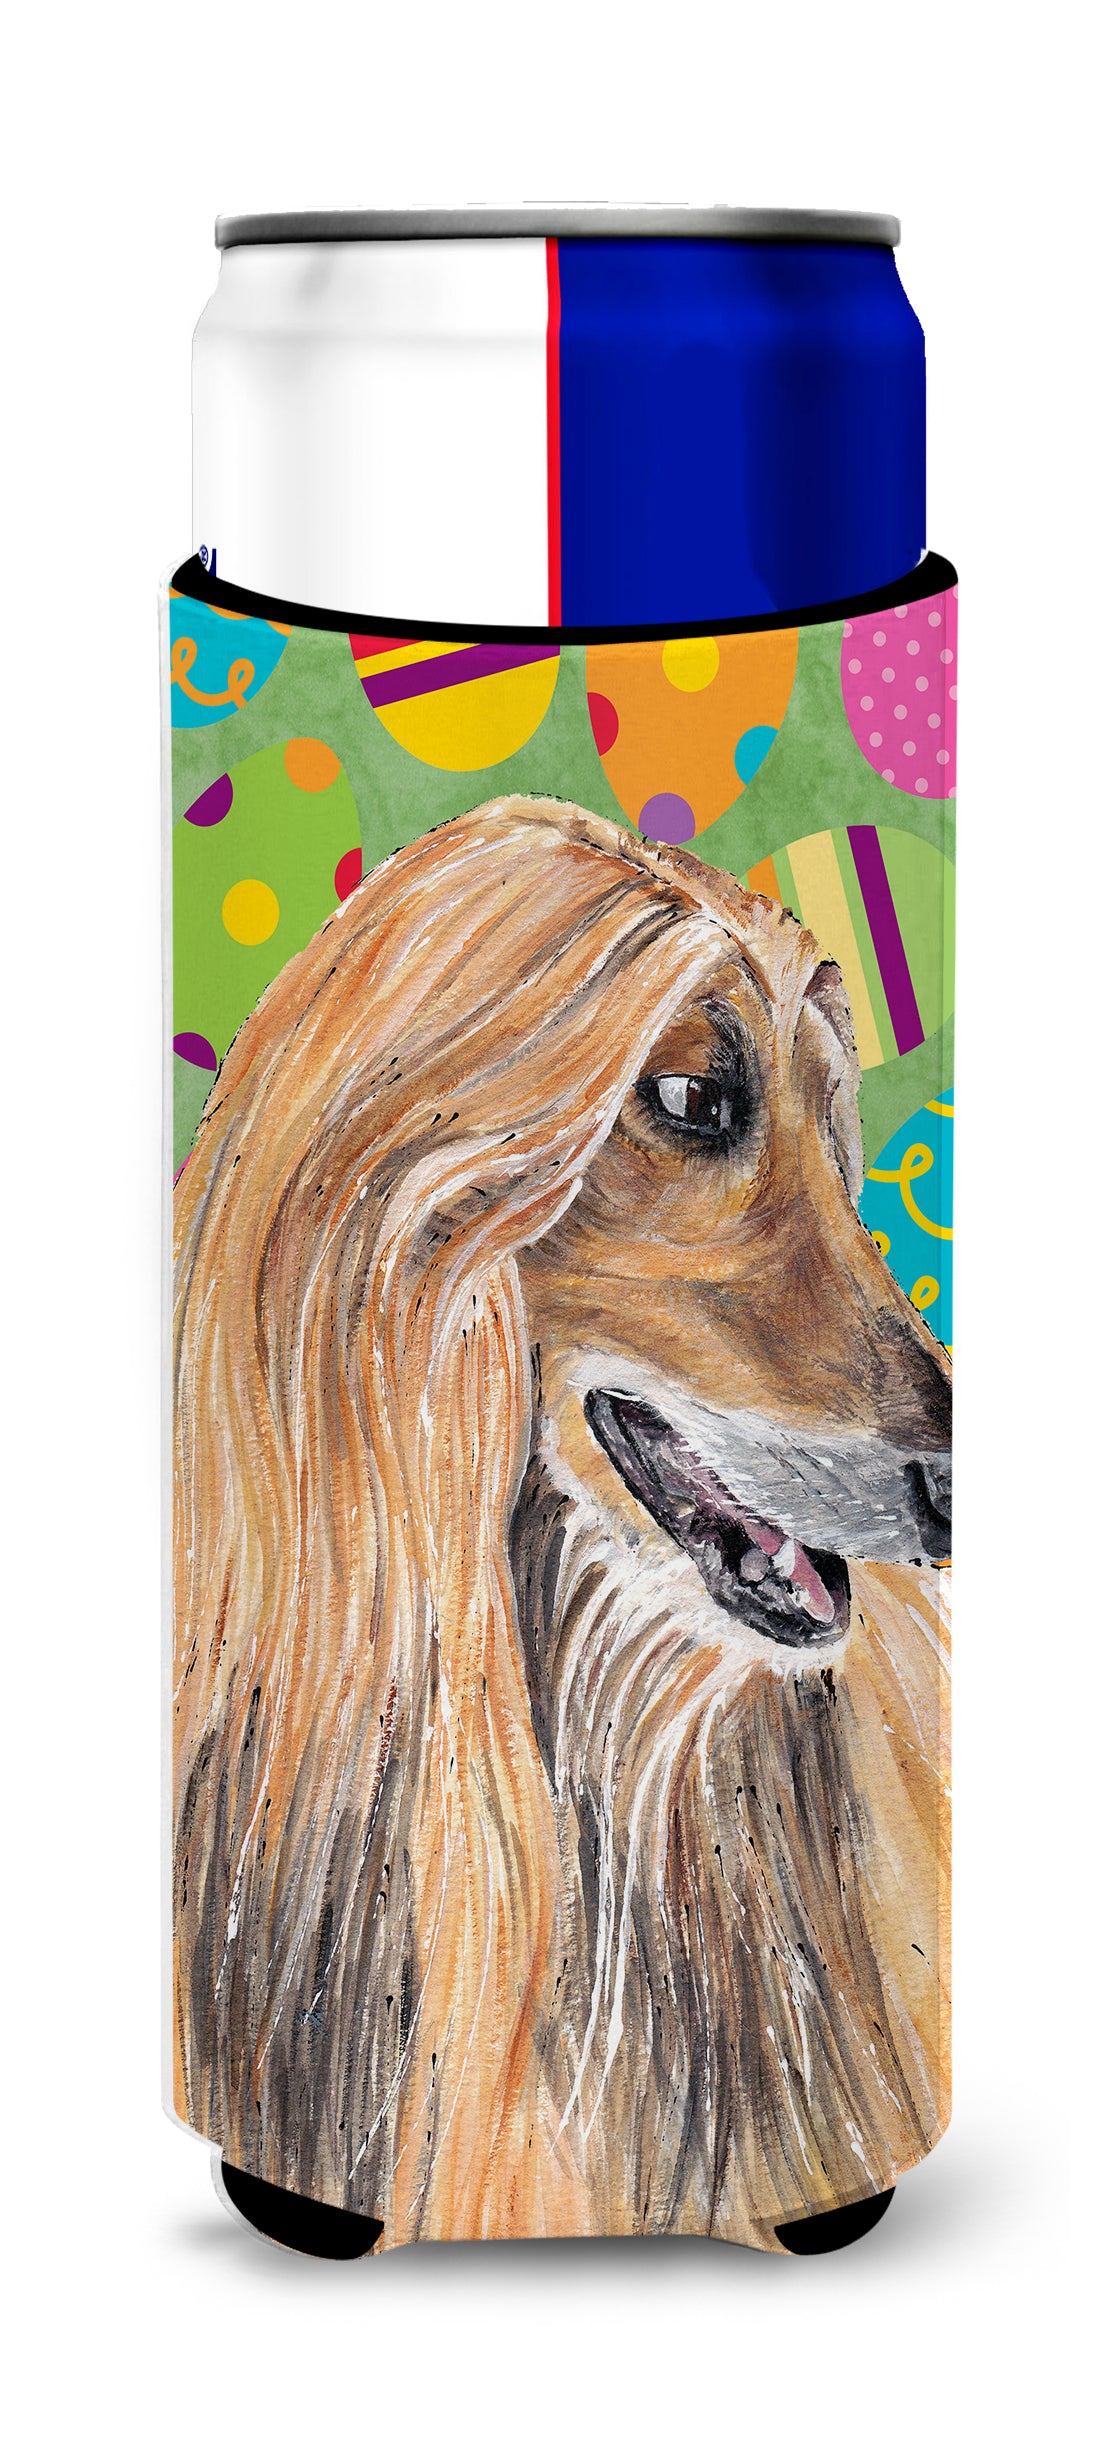 Afghan Hound Easter Eggtravaganza Ultra Beverage Insulators for slim cans SC9500MUK.